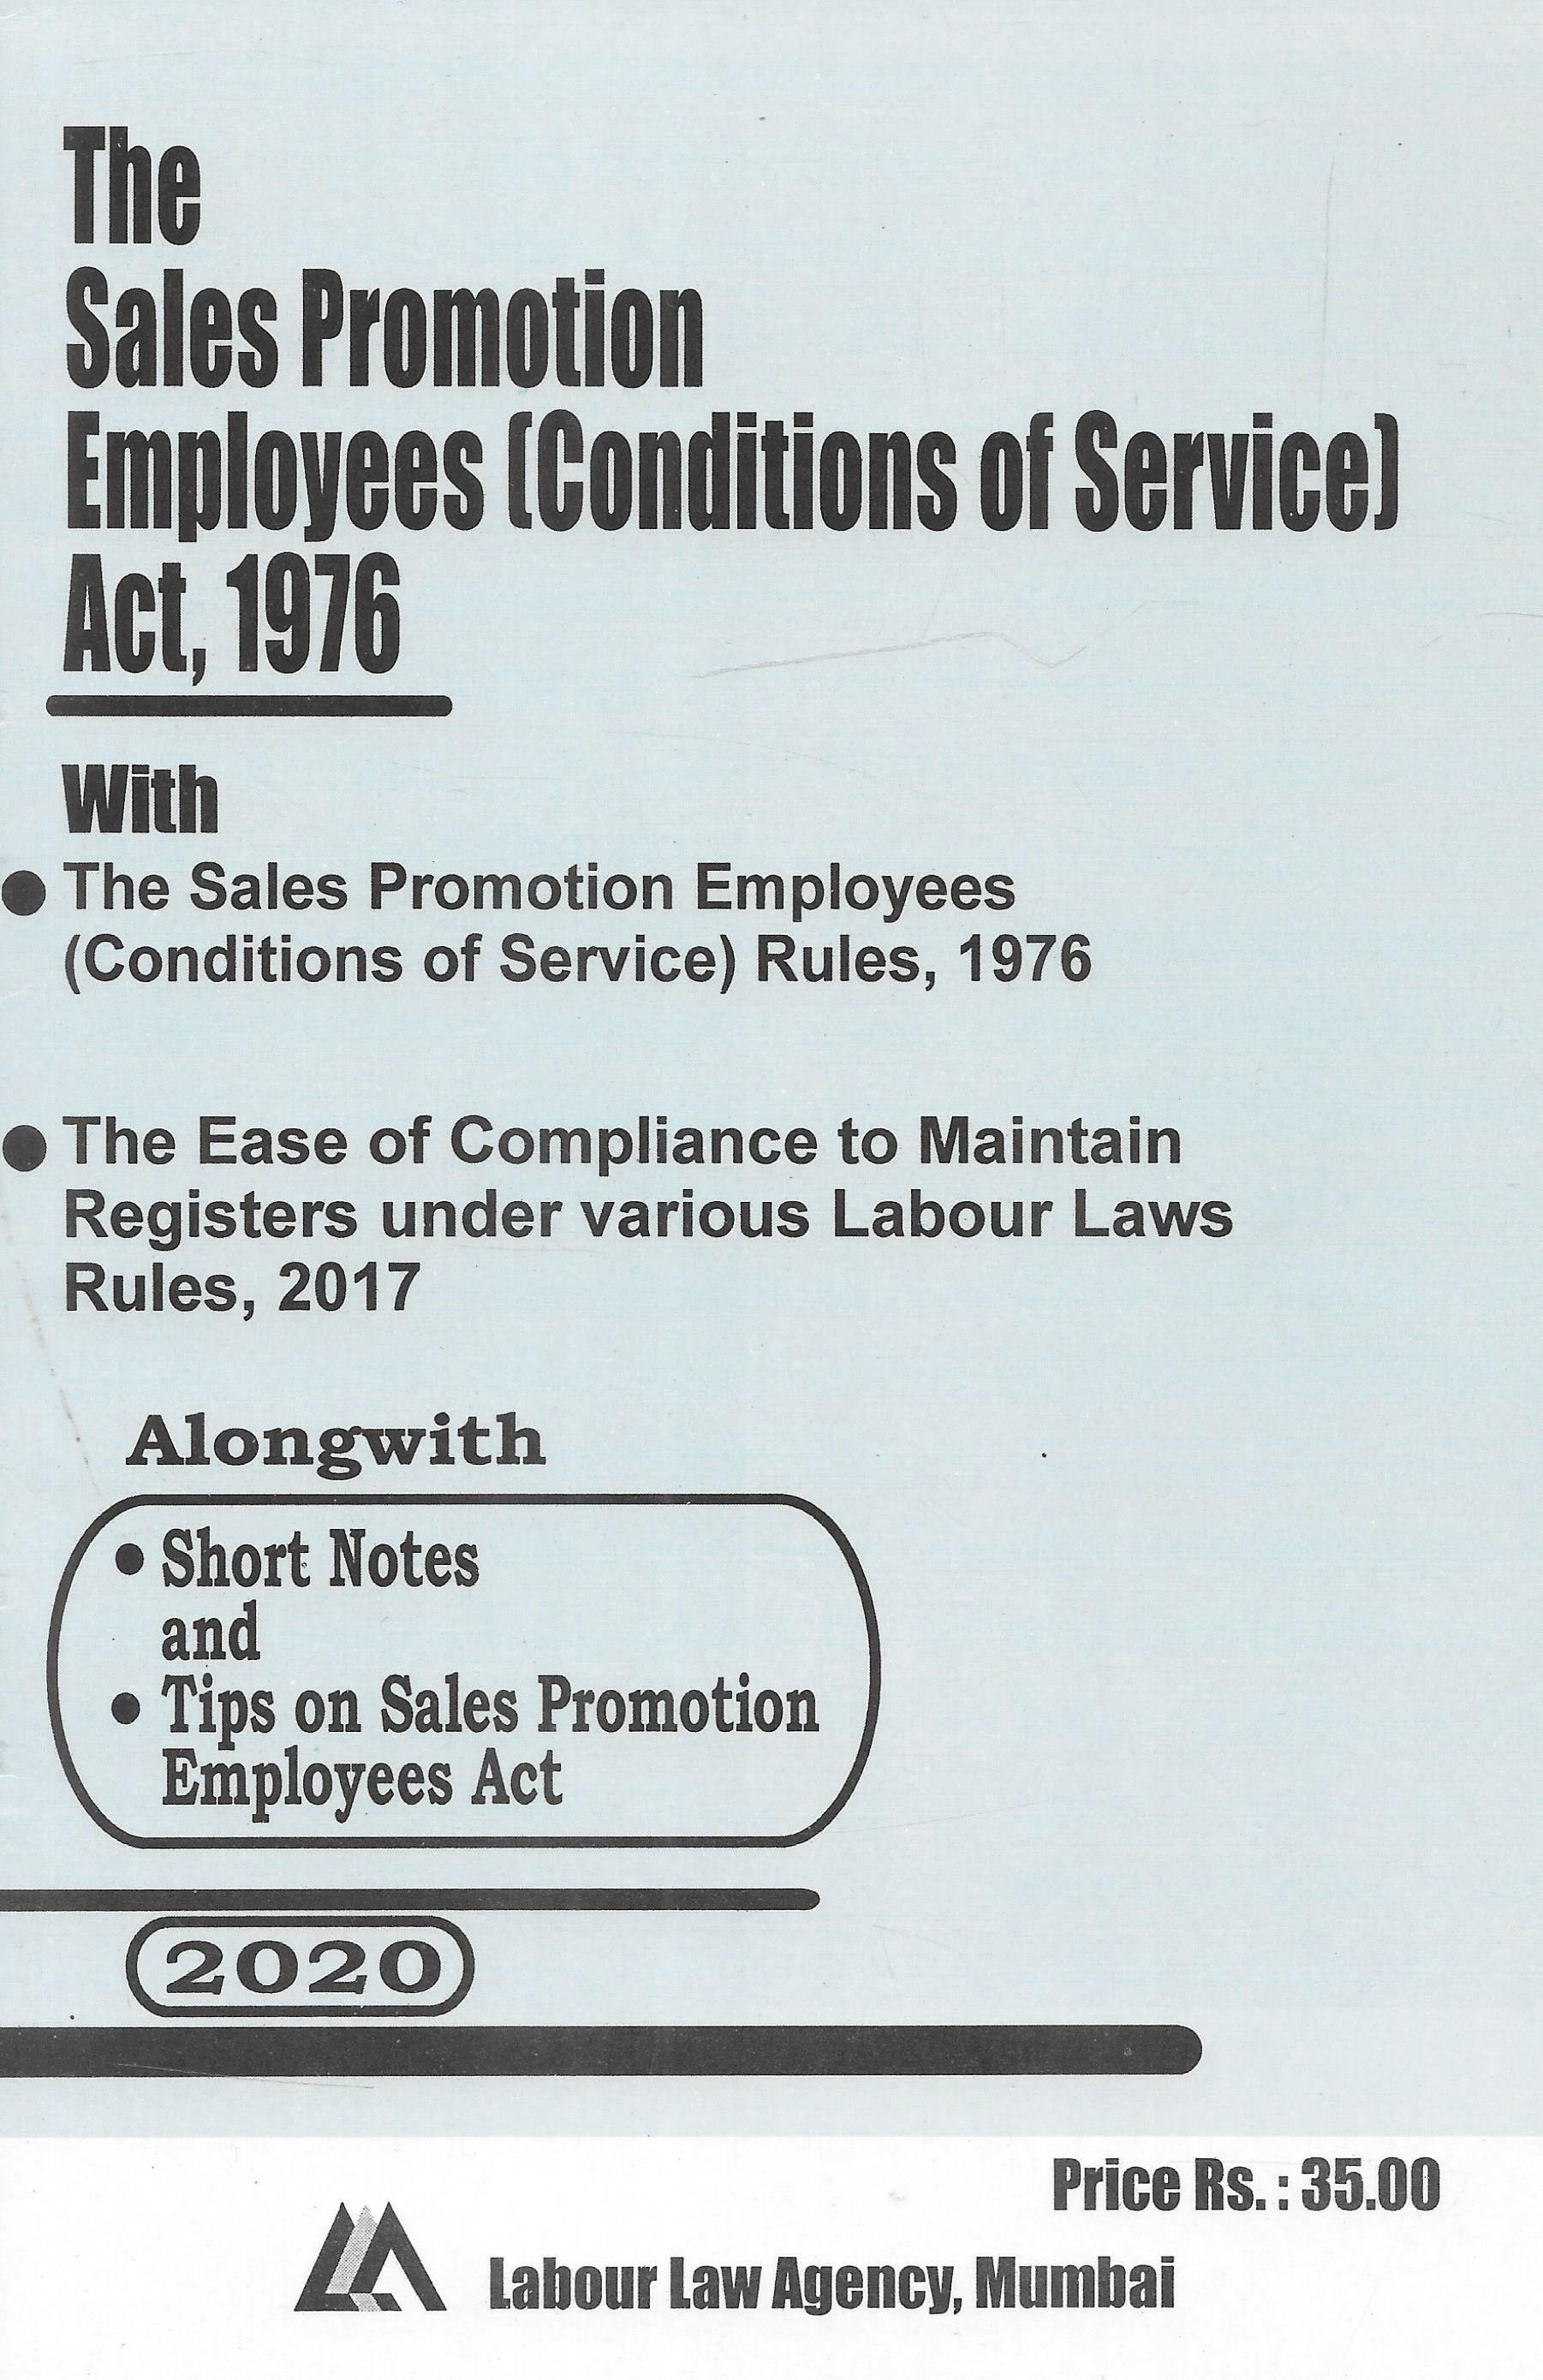 The Sales Promotion Employees Act, 1976